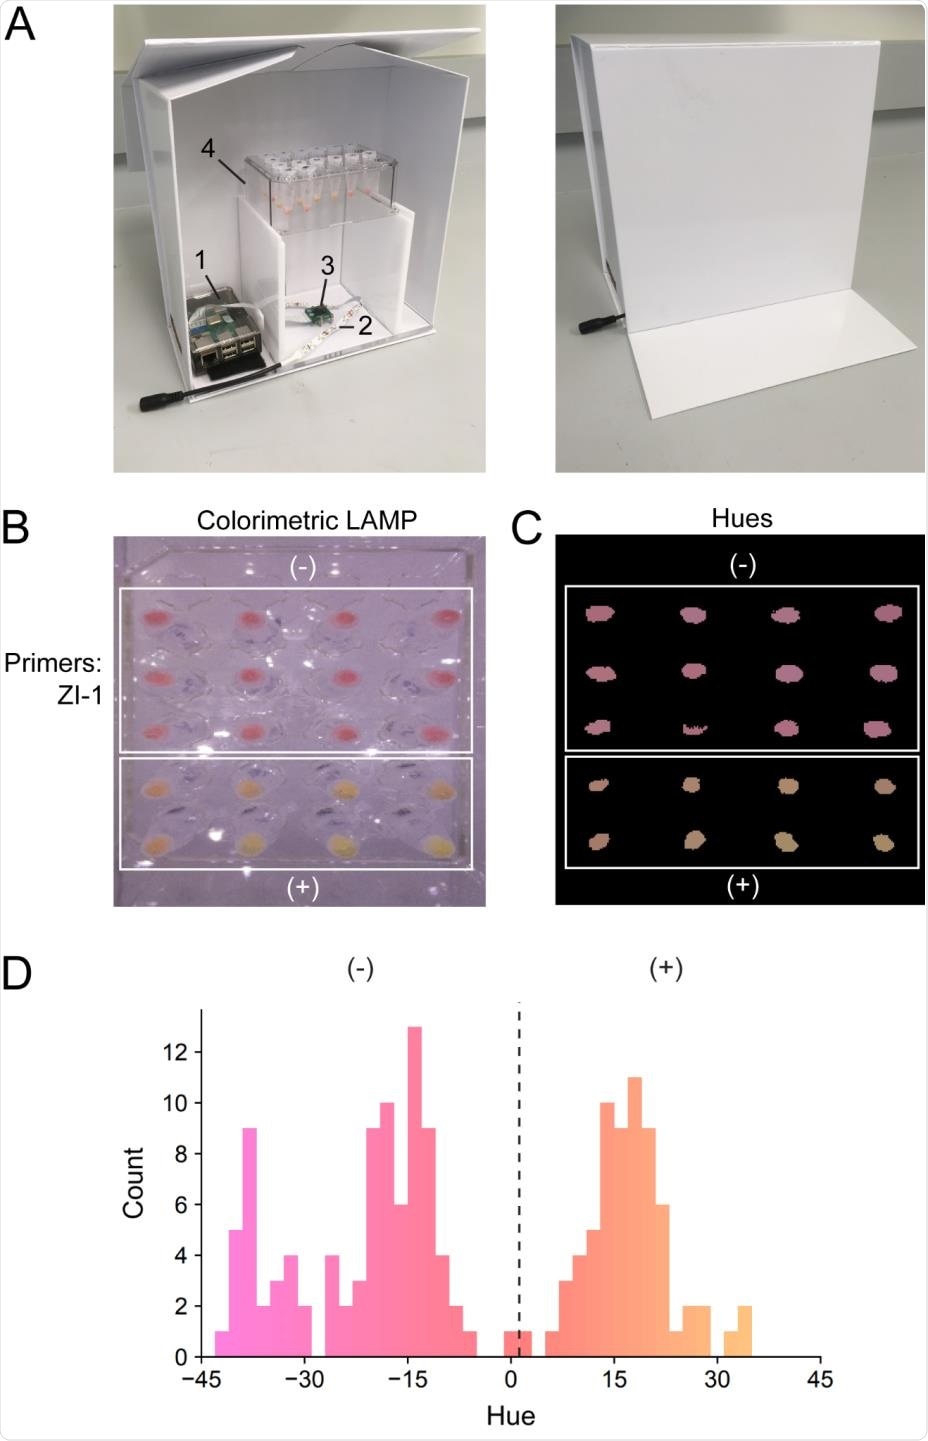 Colorimetric quantification of LAMP reactions. (A) Illuminated lightbox with automated image acquisition using Raspberry Pi. 1) Raspberry Pi unit; 2) white LED strip; 3) camera unit; 4) test tube rack. (B) LAMP reactions using WHotLAMP with ZI-1 primers on saliva samples from different negative nasal231 swab qPCR SARS-CoV-2 individuals (top white box) and SARS-CoV-2 positive (nasal swab) samples (bottom white box). (C) Processed image showing conversion of colorimetric LAMP results to hues. (D) Hue distribution of WHotLAMP saliva results from negative (-) and positive (+) nasal-swab SARS-CoV-2 qPCR donor samples.